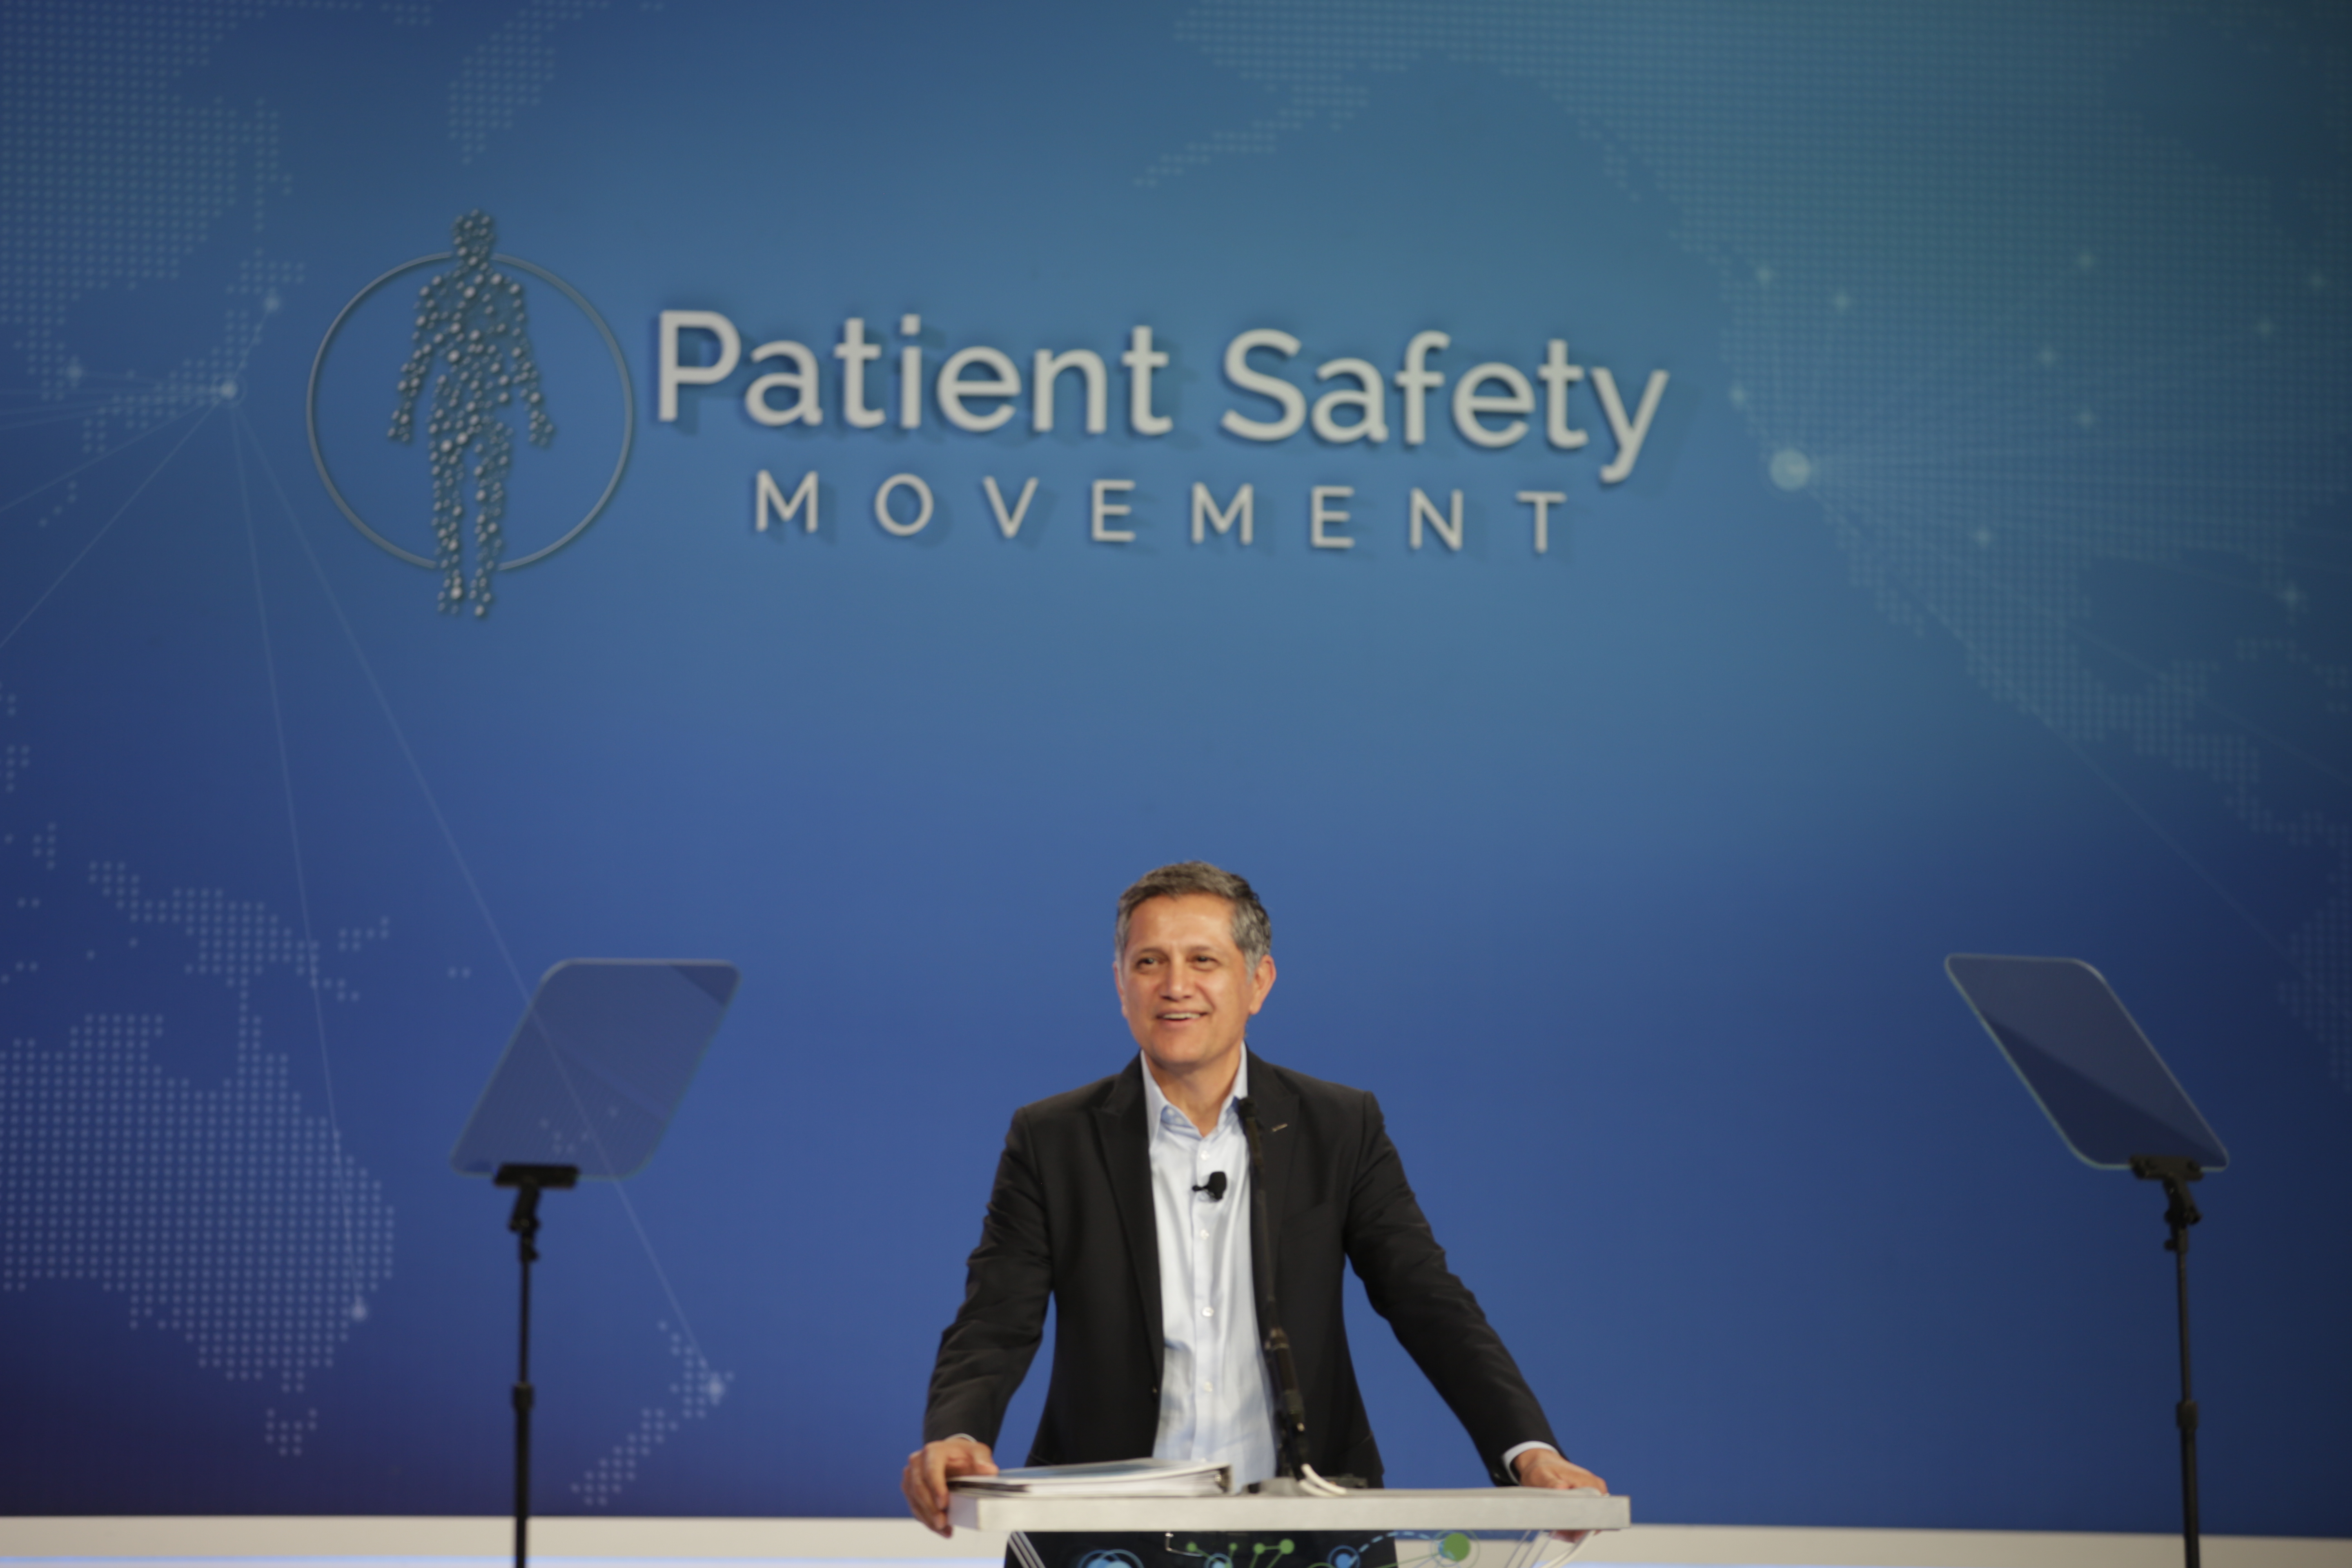 Patient Safety Movement Foundation 7th Annual Summit 2019 Recap and Review by Dr. Jessica Louie, Pharmacist Advocate at Find Your Script and The Burnout Doctor and Burnout Coach | Get to ZERO preventable deaths